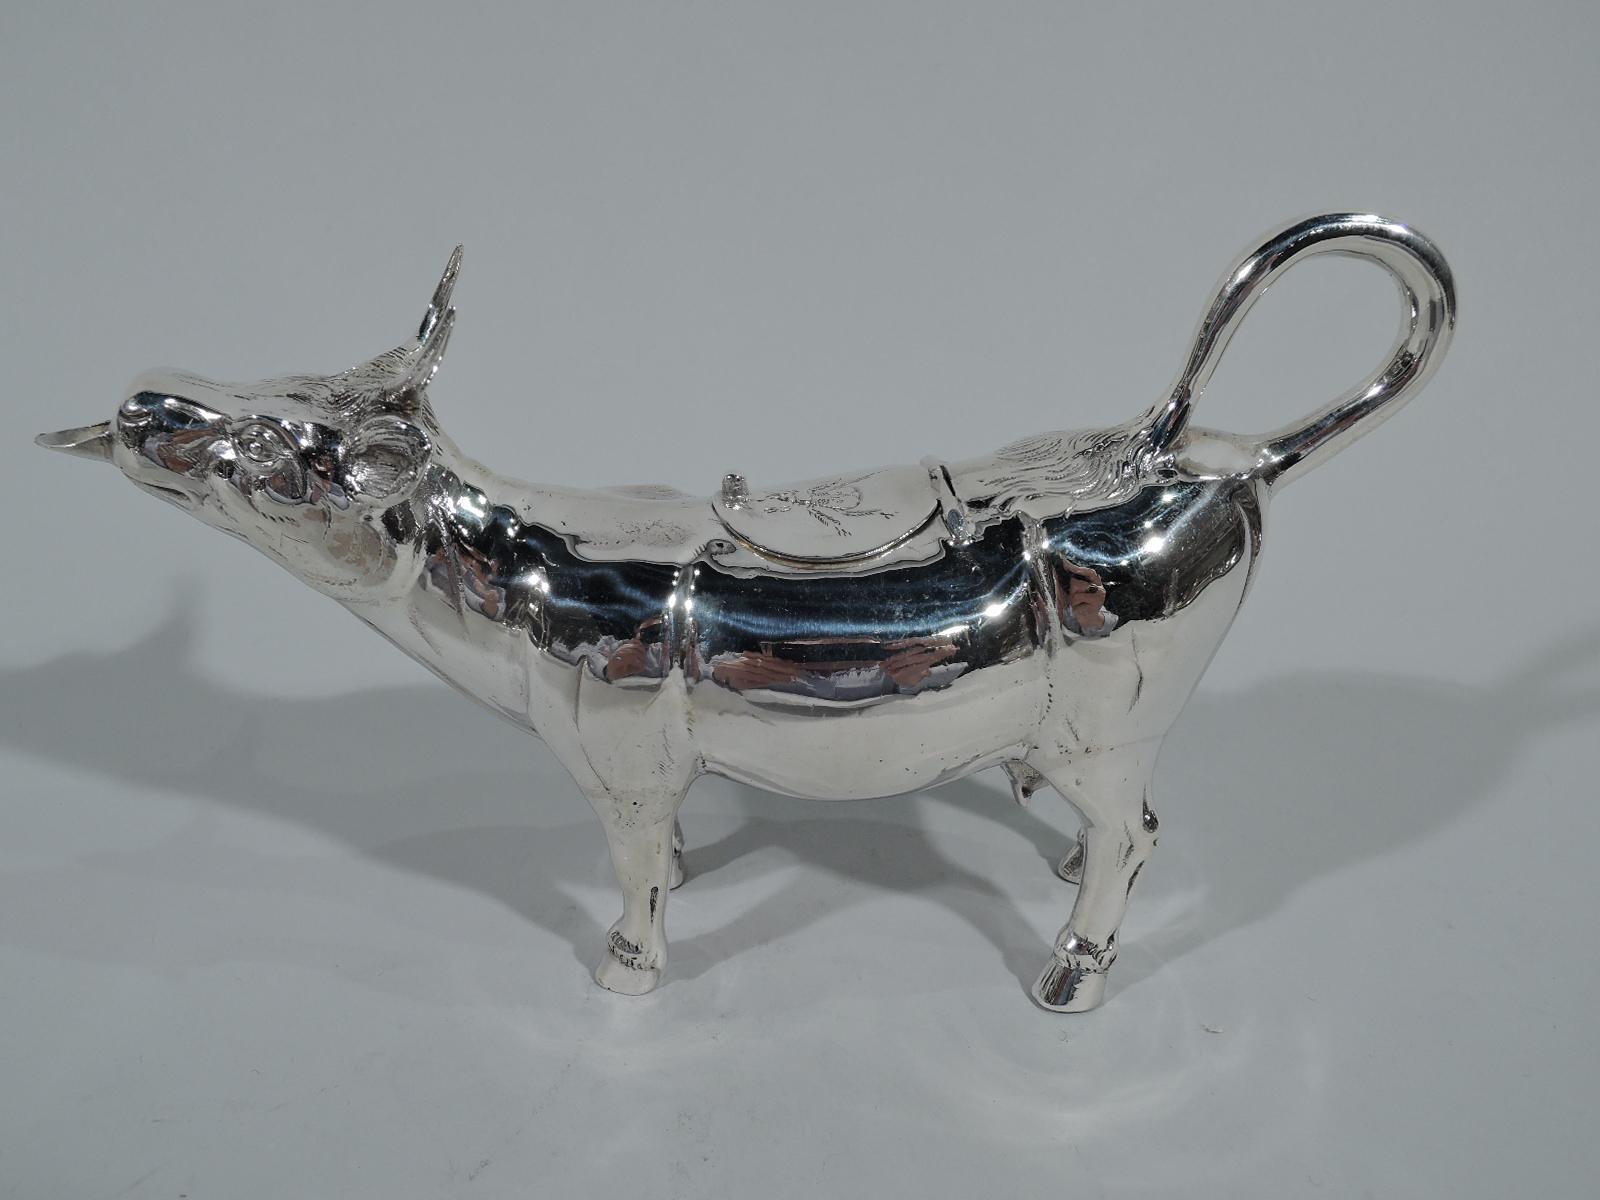 Antique German sterling silver cow creamer. Wide body with firmly planted hoofs, flicked-back tail ring handle, and hinged dorsal cover with engraved fly. Head has sharp horns and flicked back ears as well as spout in form of stuck-out tongue. An